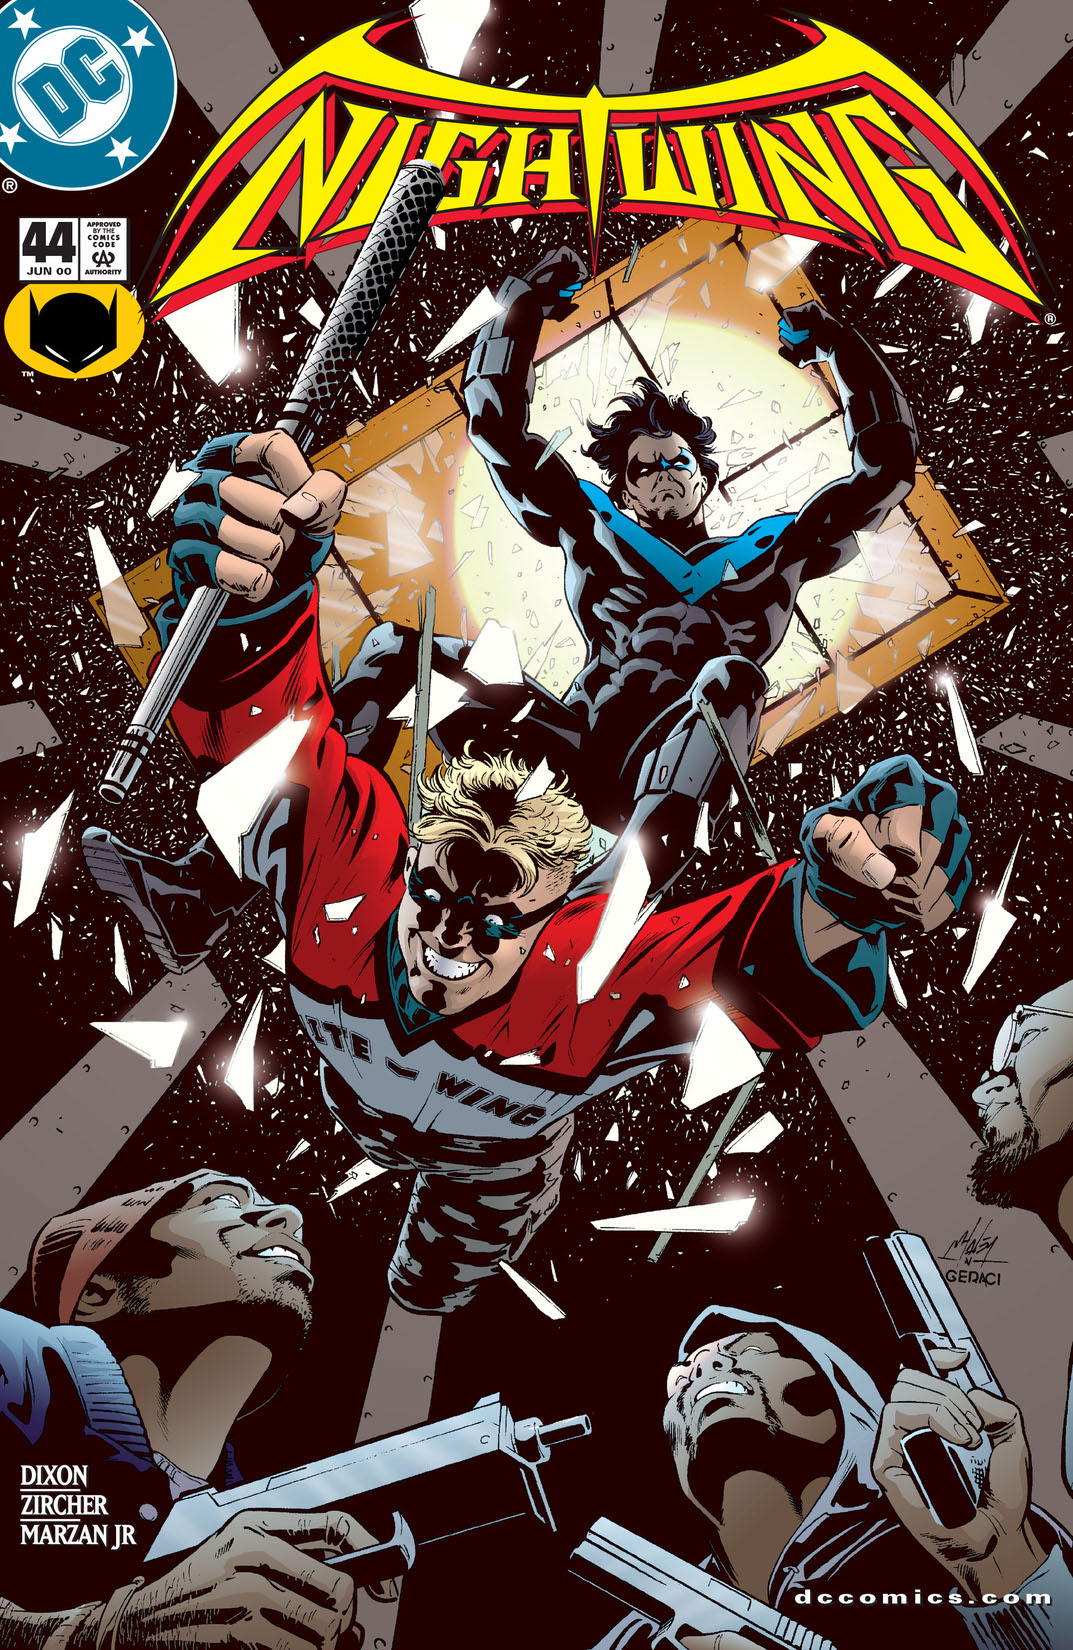 Nightwing (1996-) #44 preview images